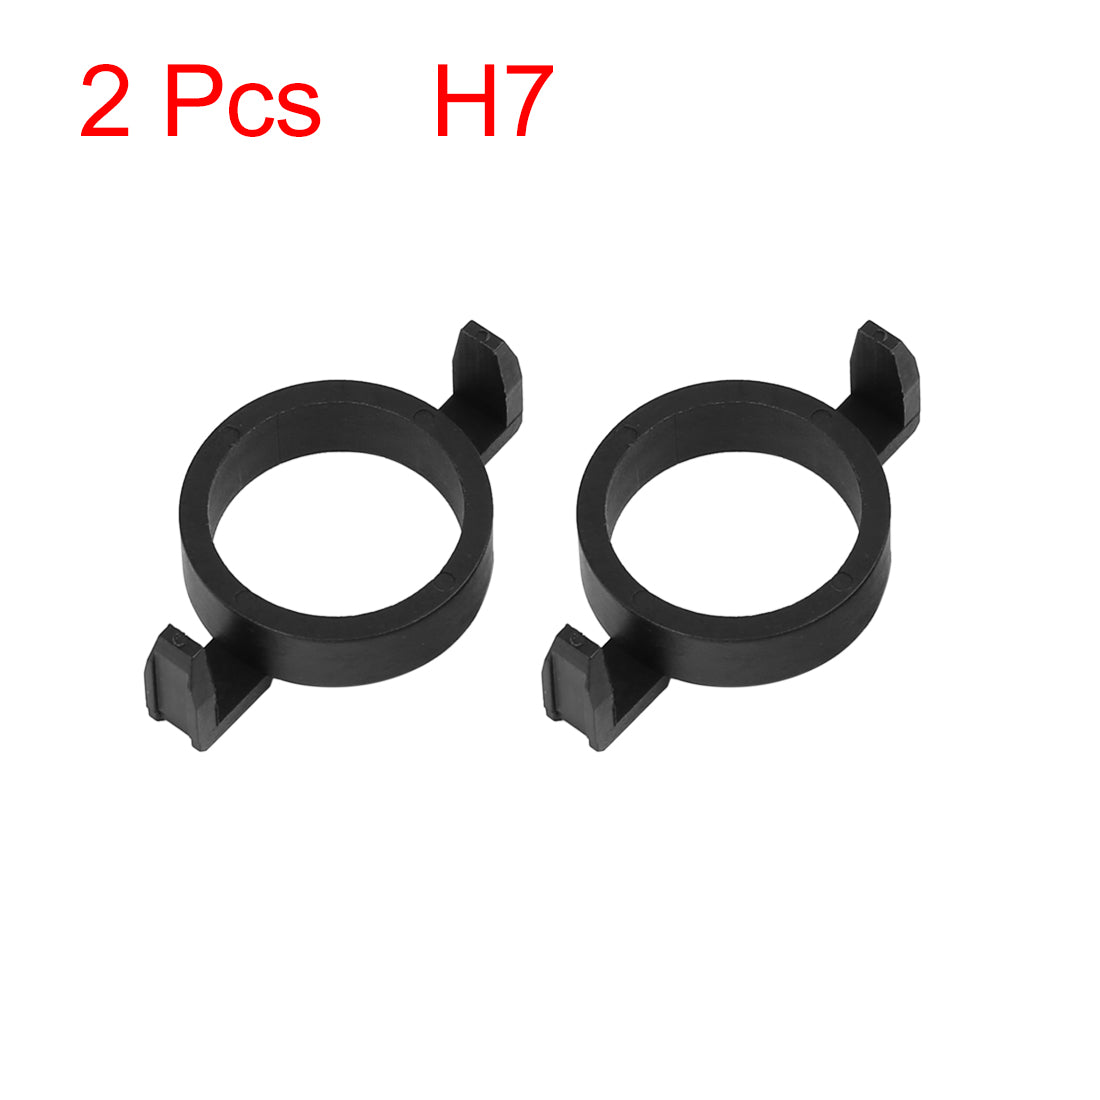 uxcell Uxcell 2pcs Black Plastic H7 LED Headlight Base Buckle Lamp Bulb Holder Adapter for Ford Mondeo for Peugeot